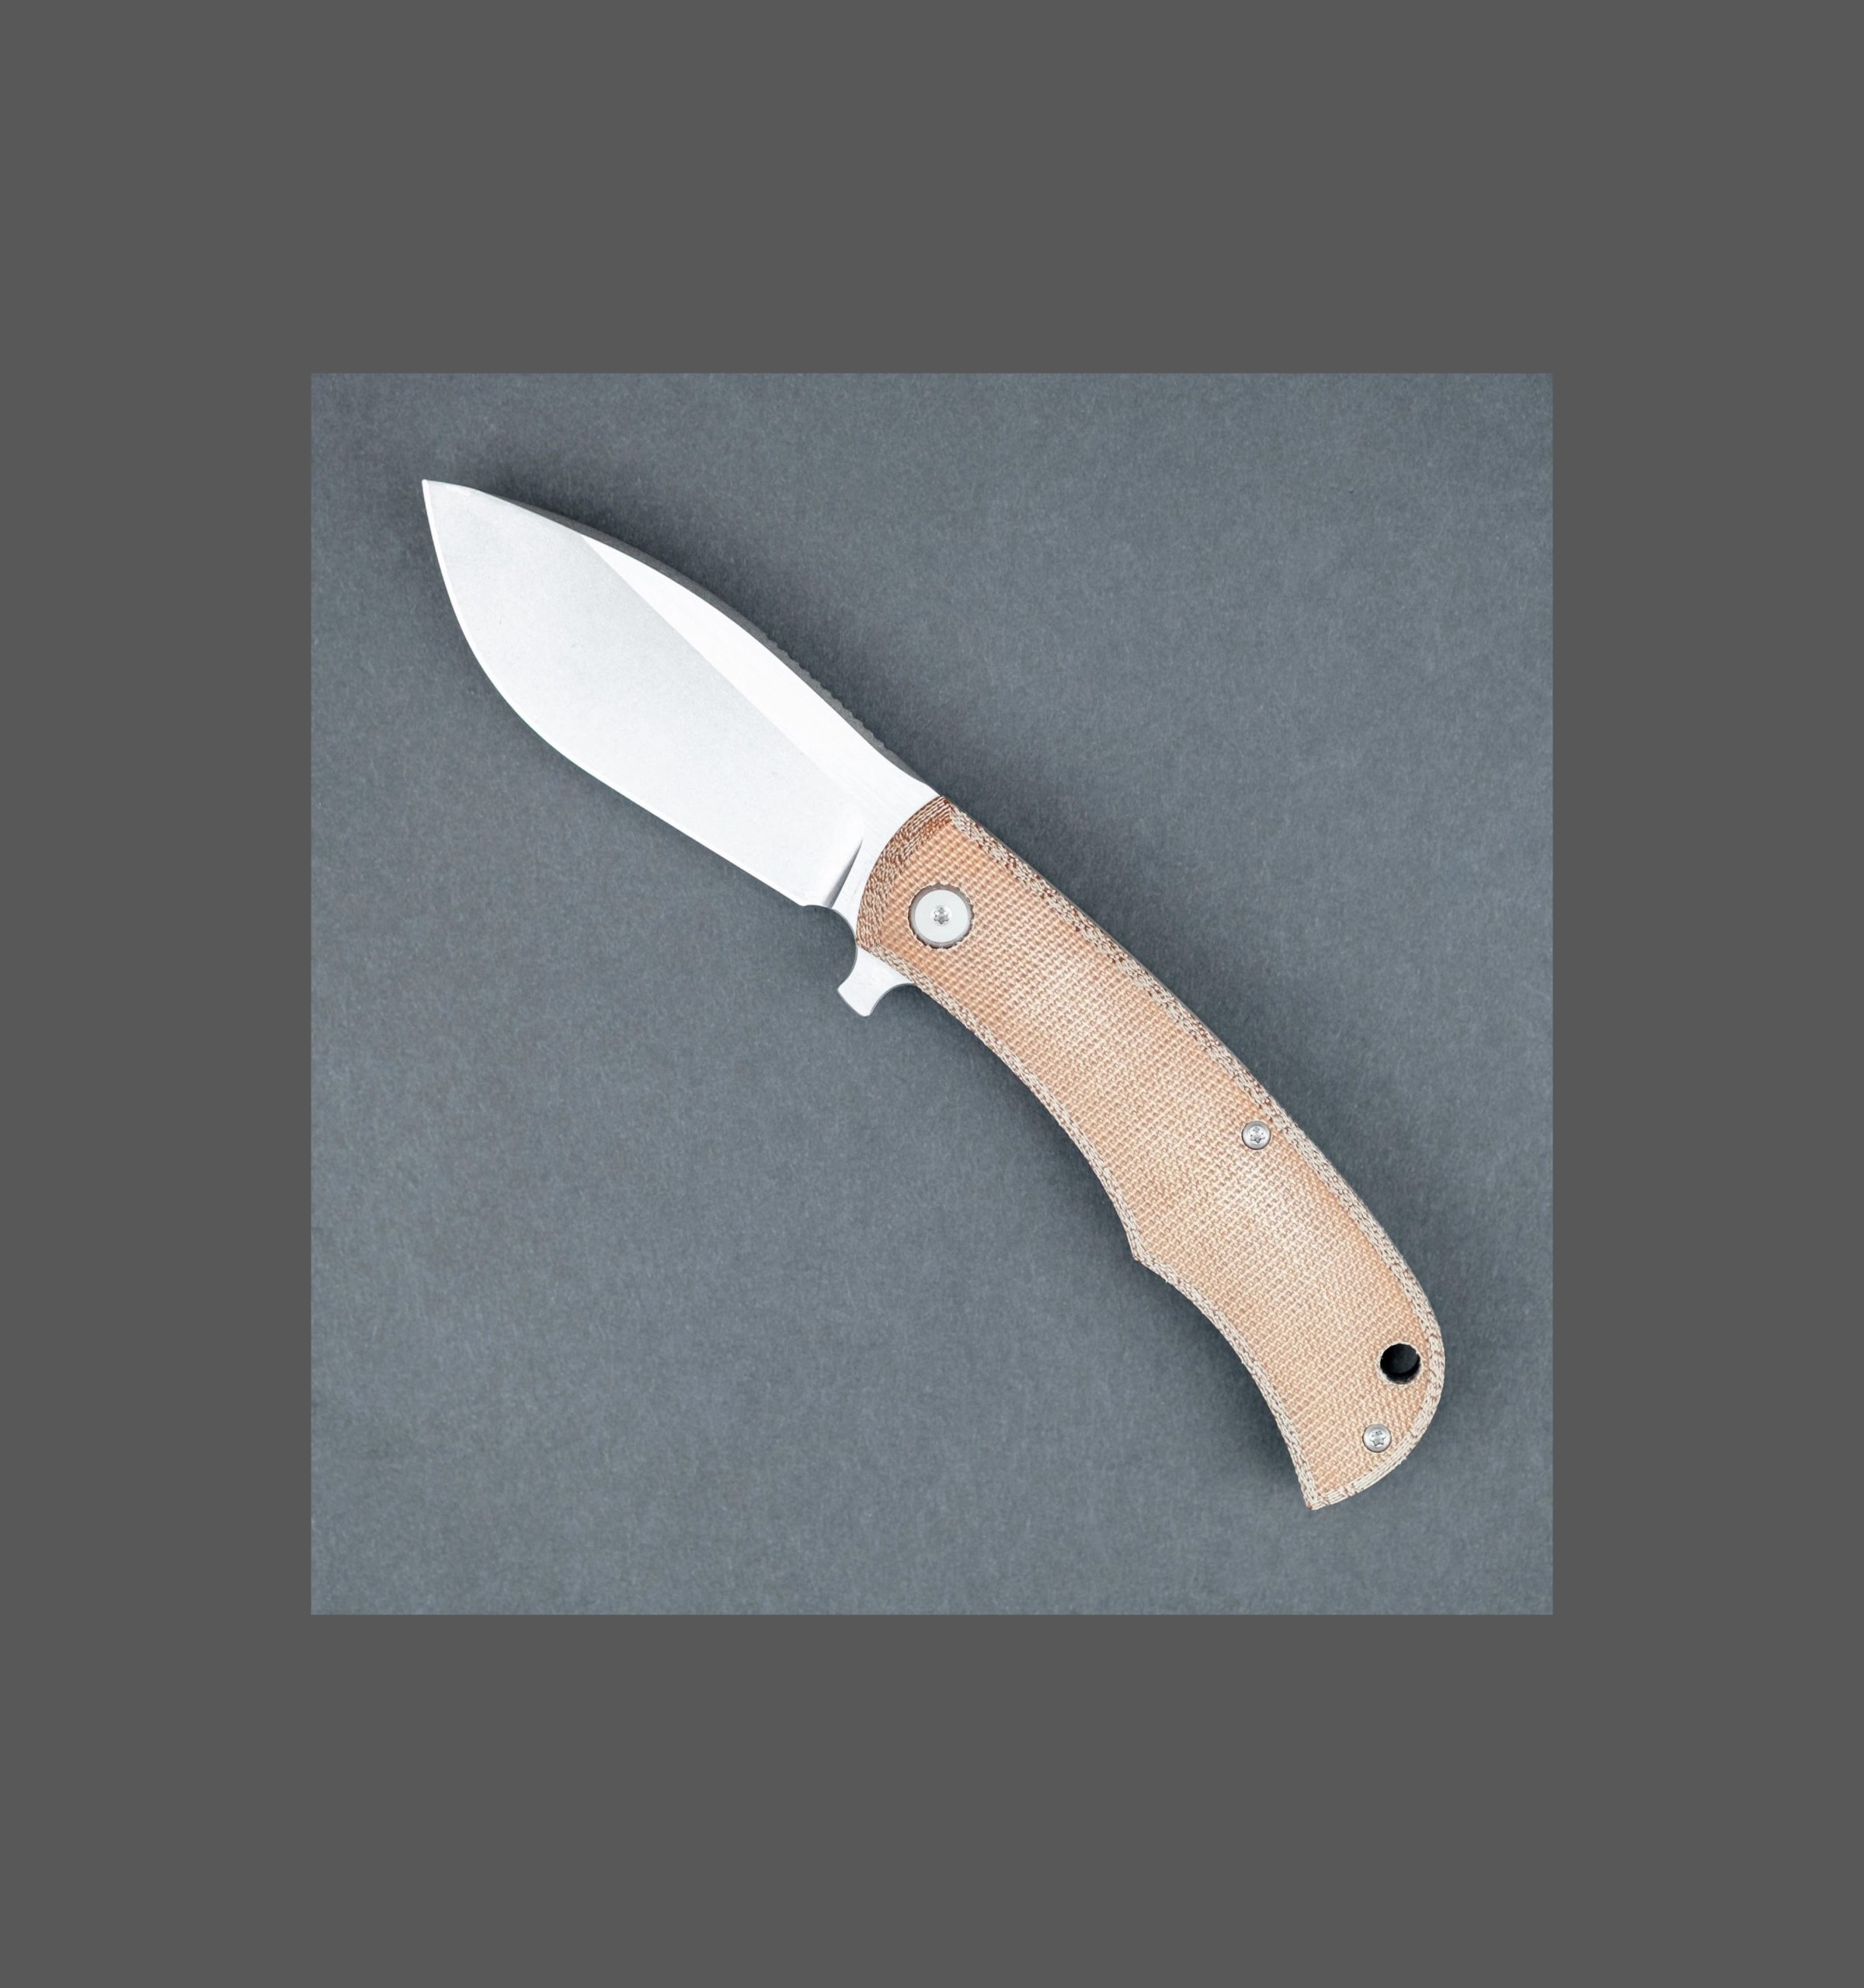 Chris Taylor Talks Nessie and Knife Design in General